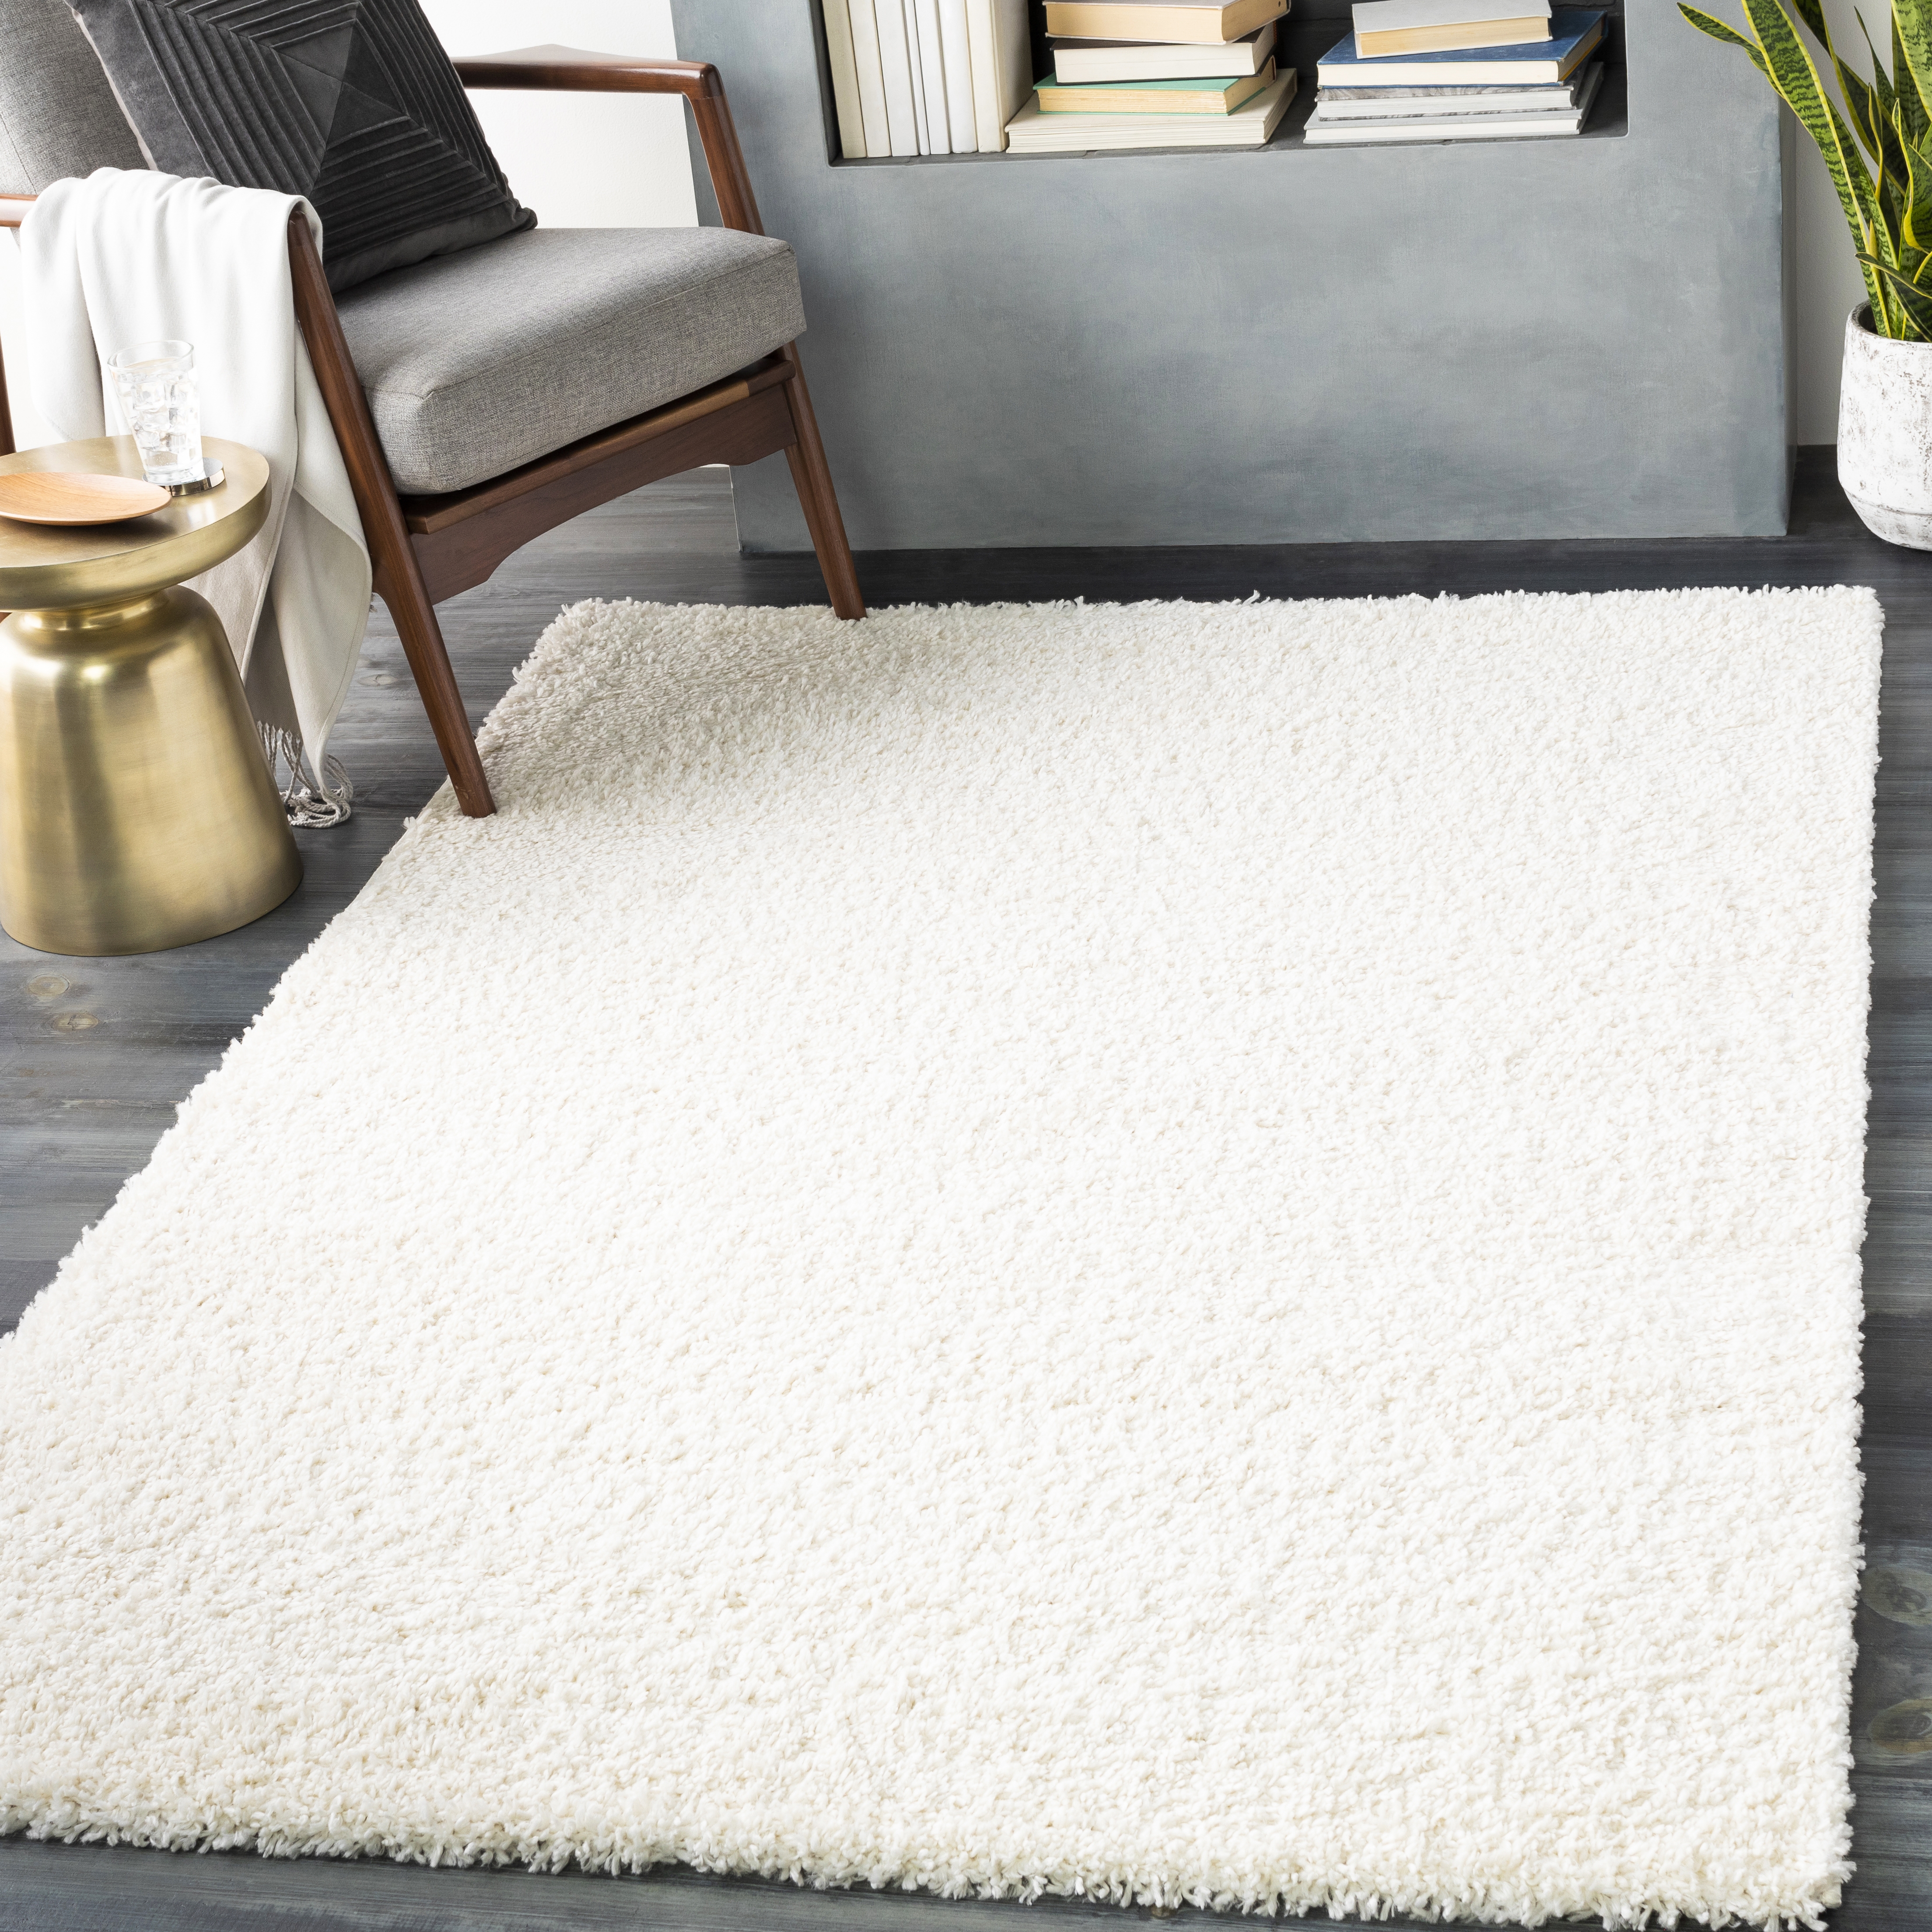 Deluxe Shag Rug, 2' x 2'11" - Image 1